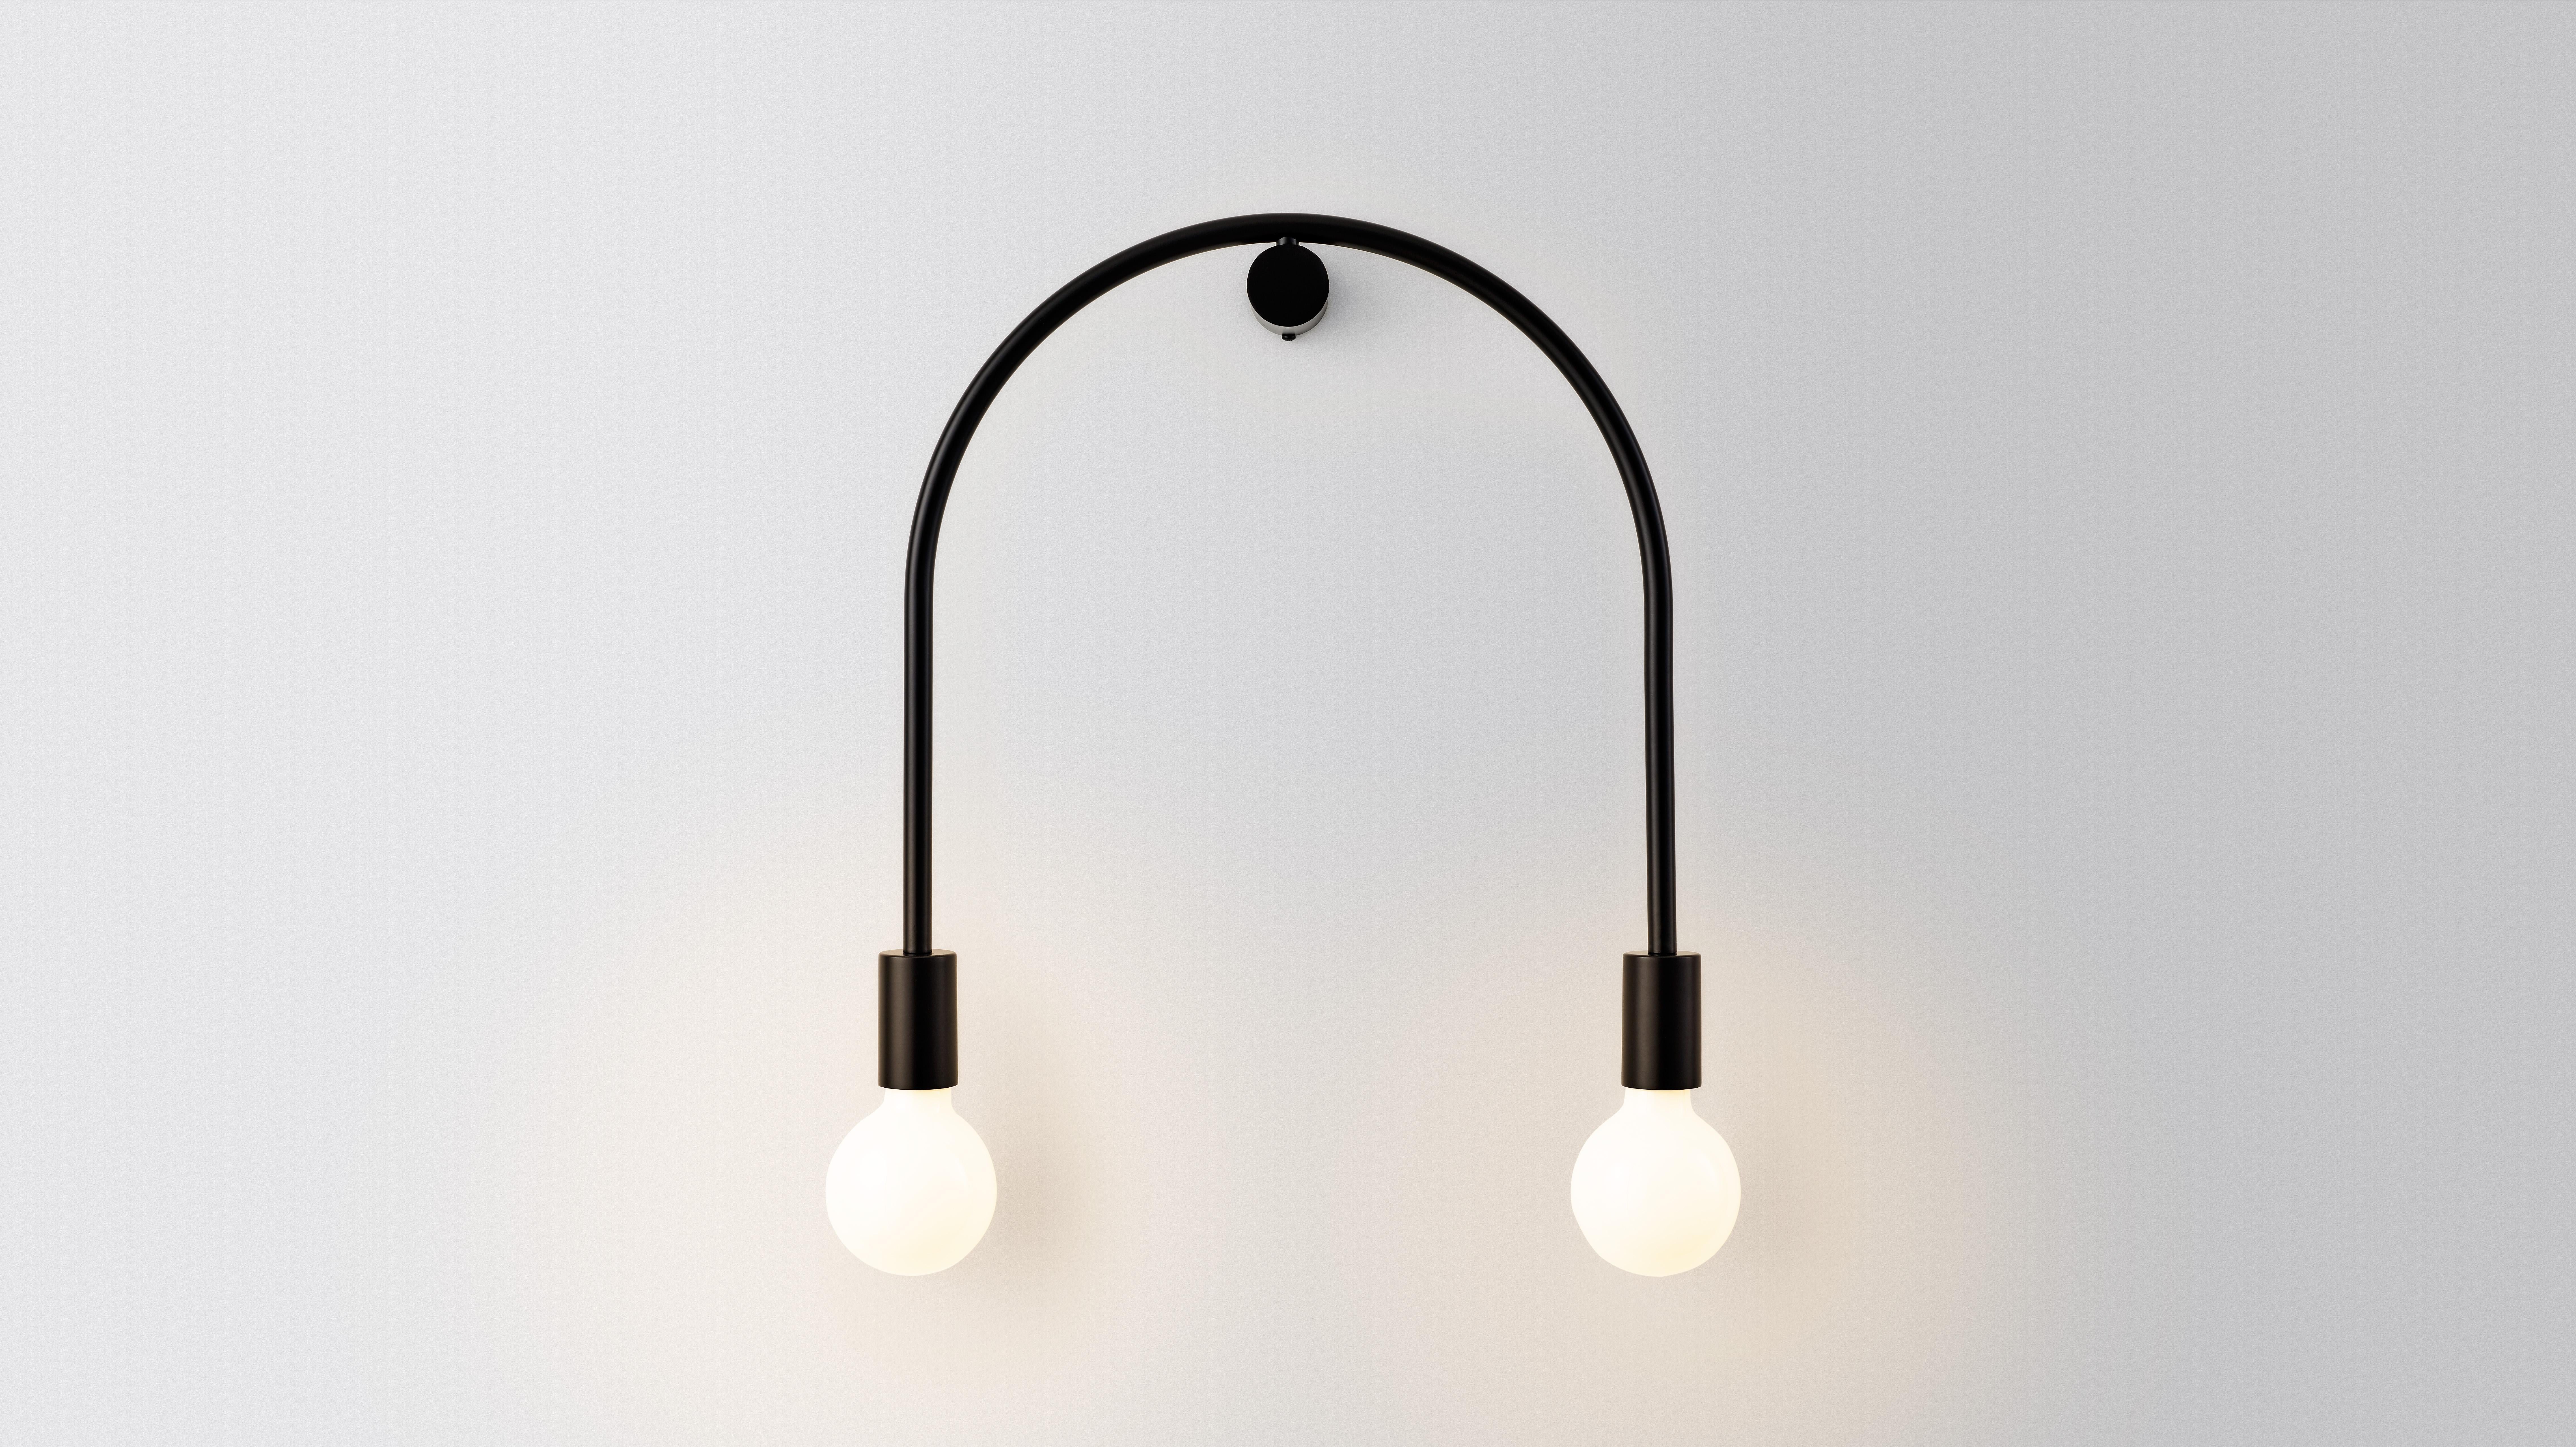 Small only U pendant light by Volker Haug
Dimensions: D 8 x W 24 x H 42 cm 
Material: Brass. 
Finish: Polished, aged, brushed, bronzed, blackened, or plated
Lamp: 240V E27 (120V E26 US) (pictured with L087 95mm opal LED) x 2
Weight: